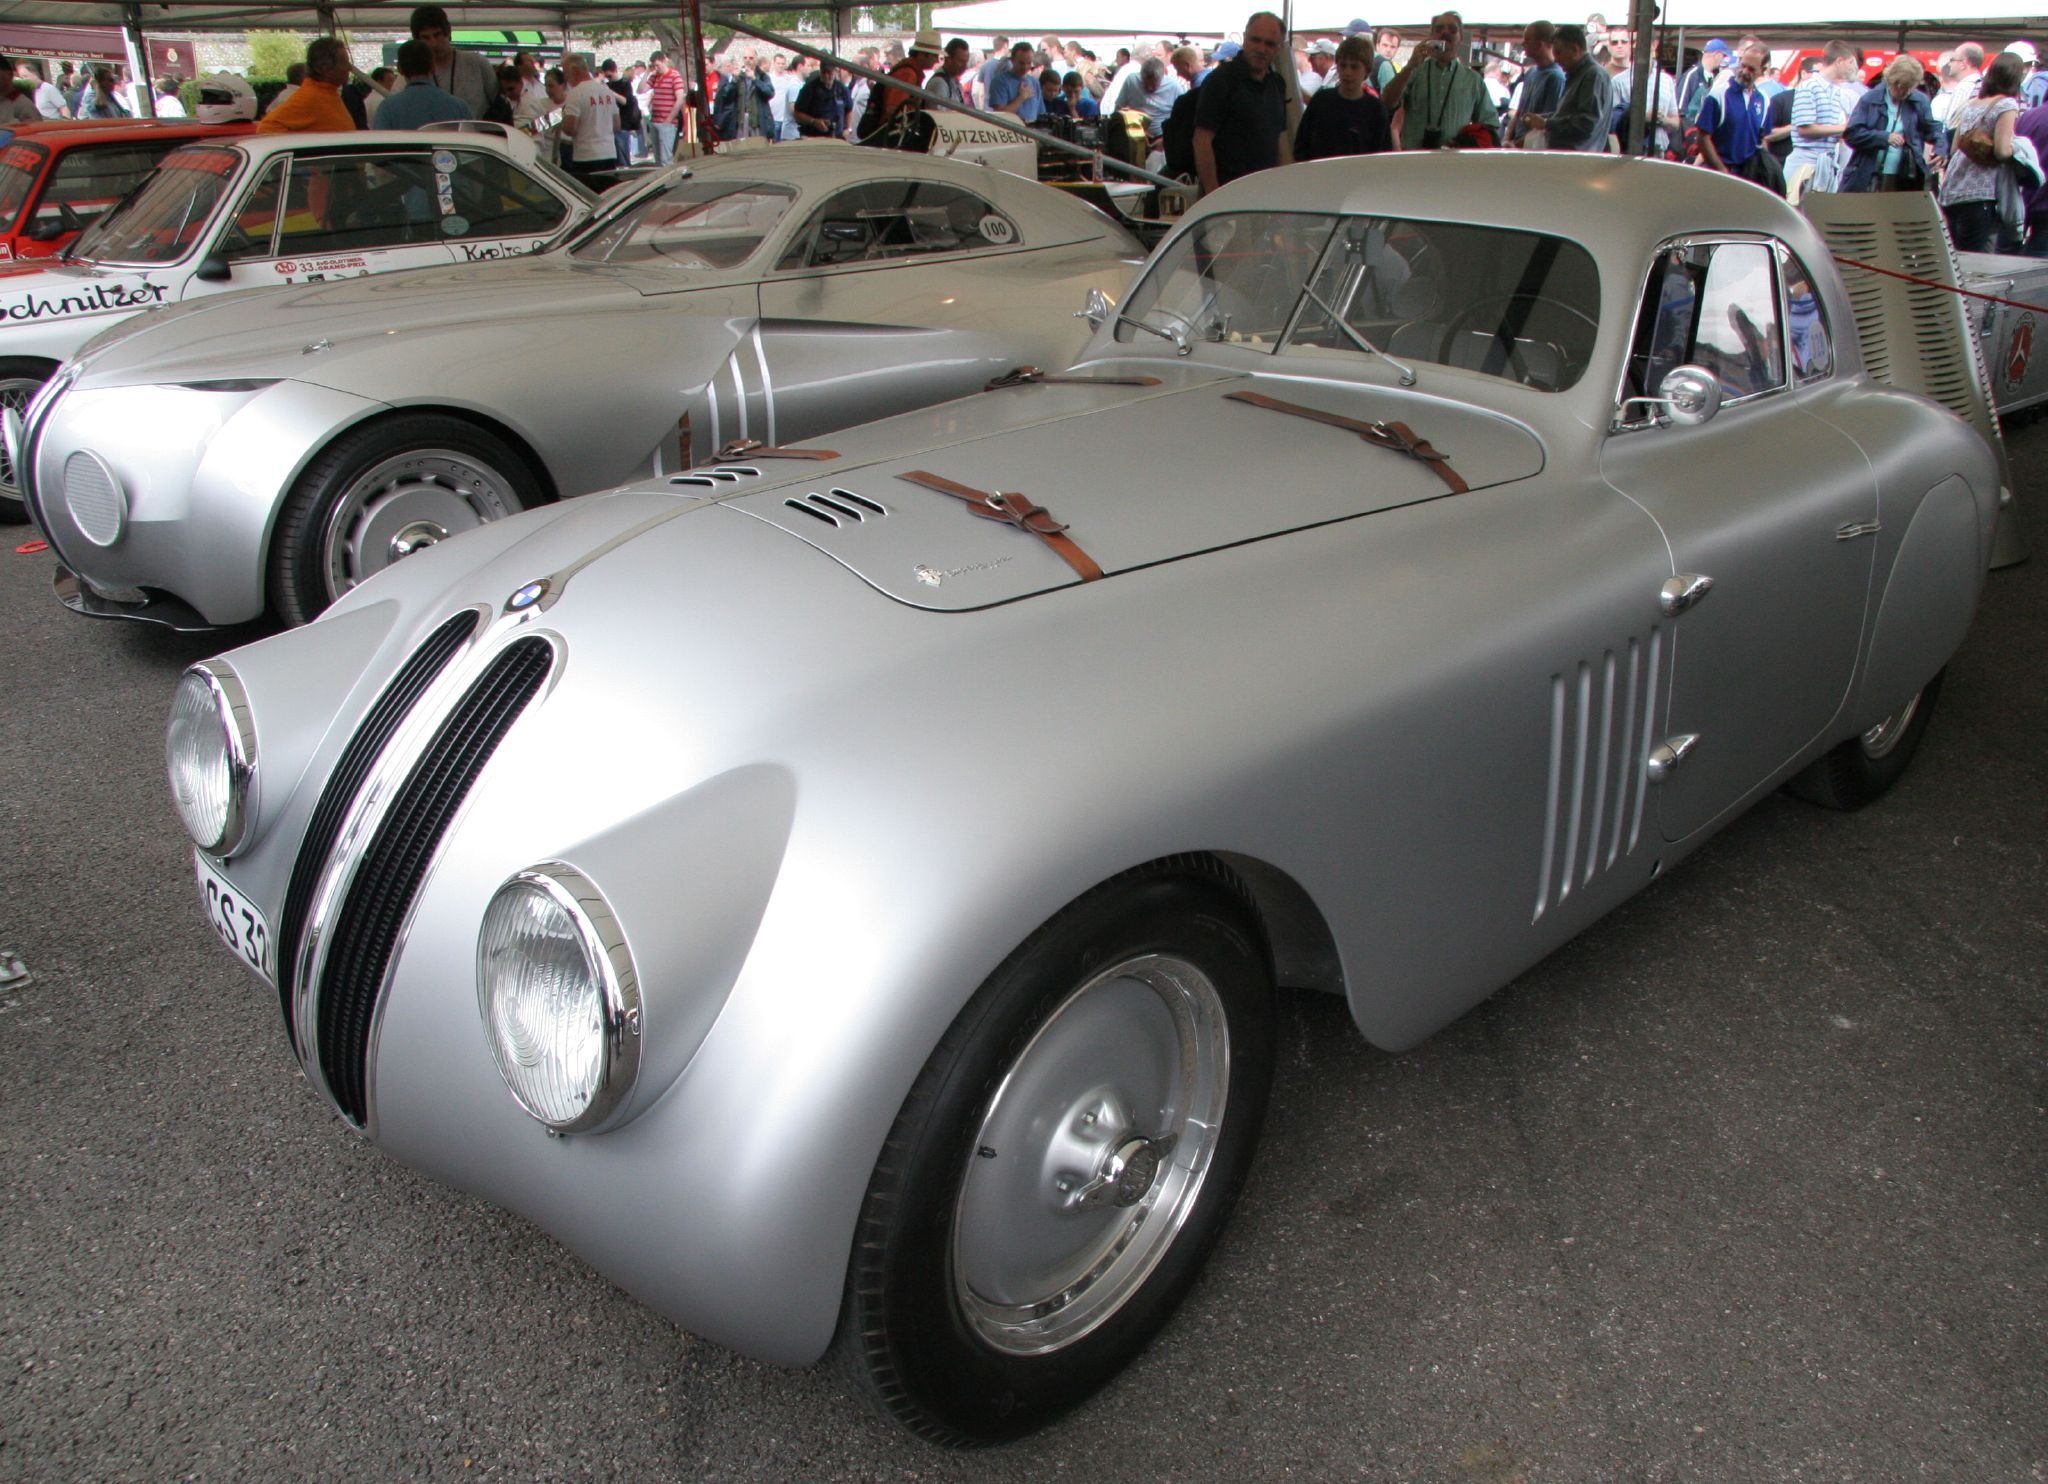 BMW_328_Mille_Miglia_Touring_Coup%C3%A9_1939_-_Flickr_-_exfordy.jpg